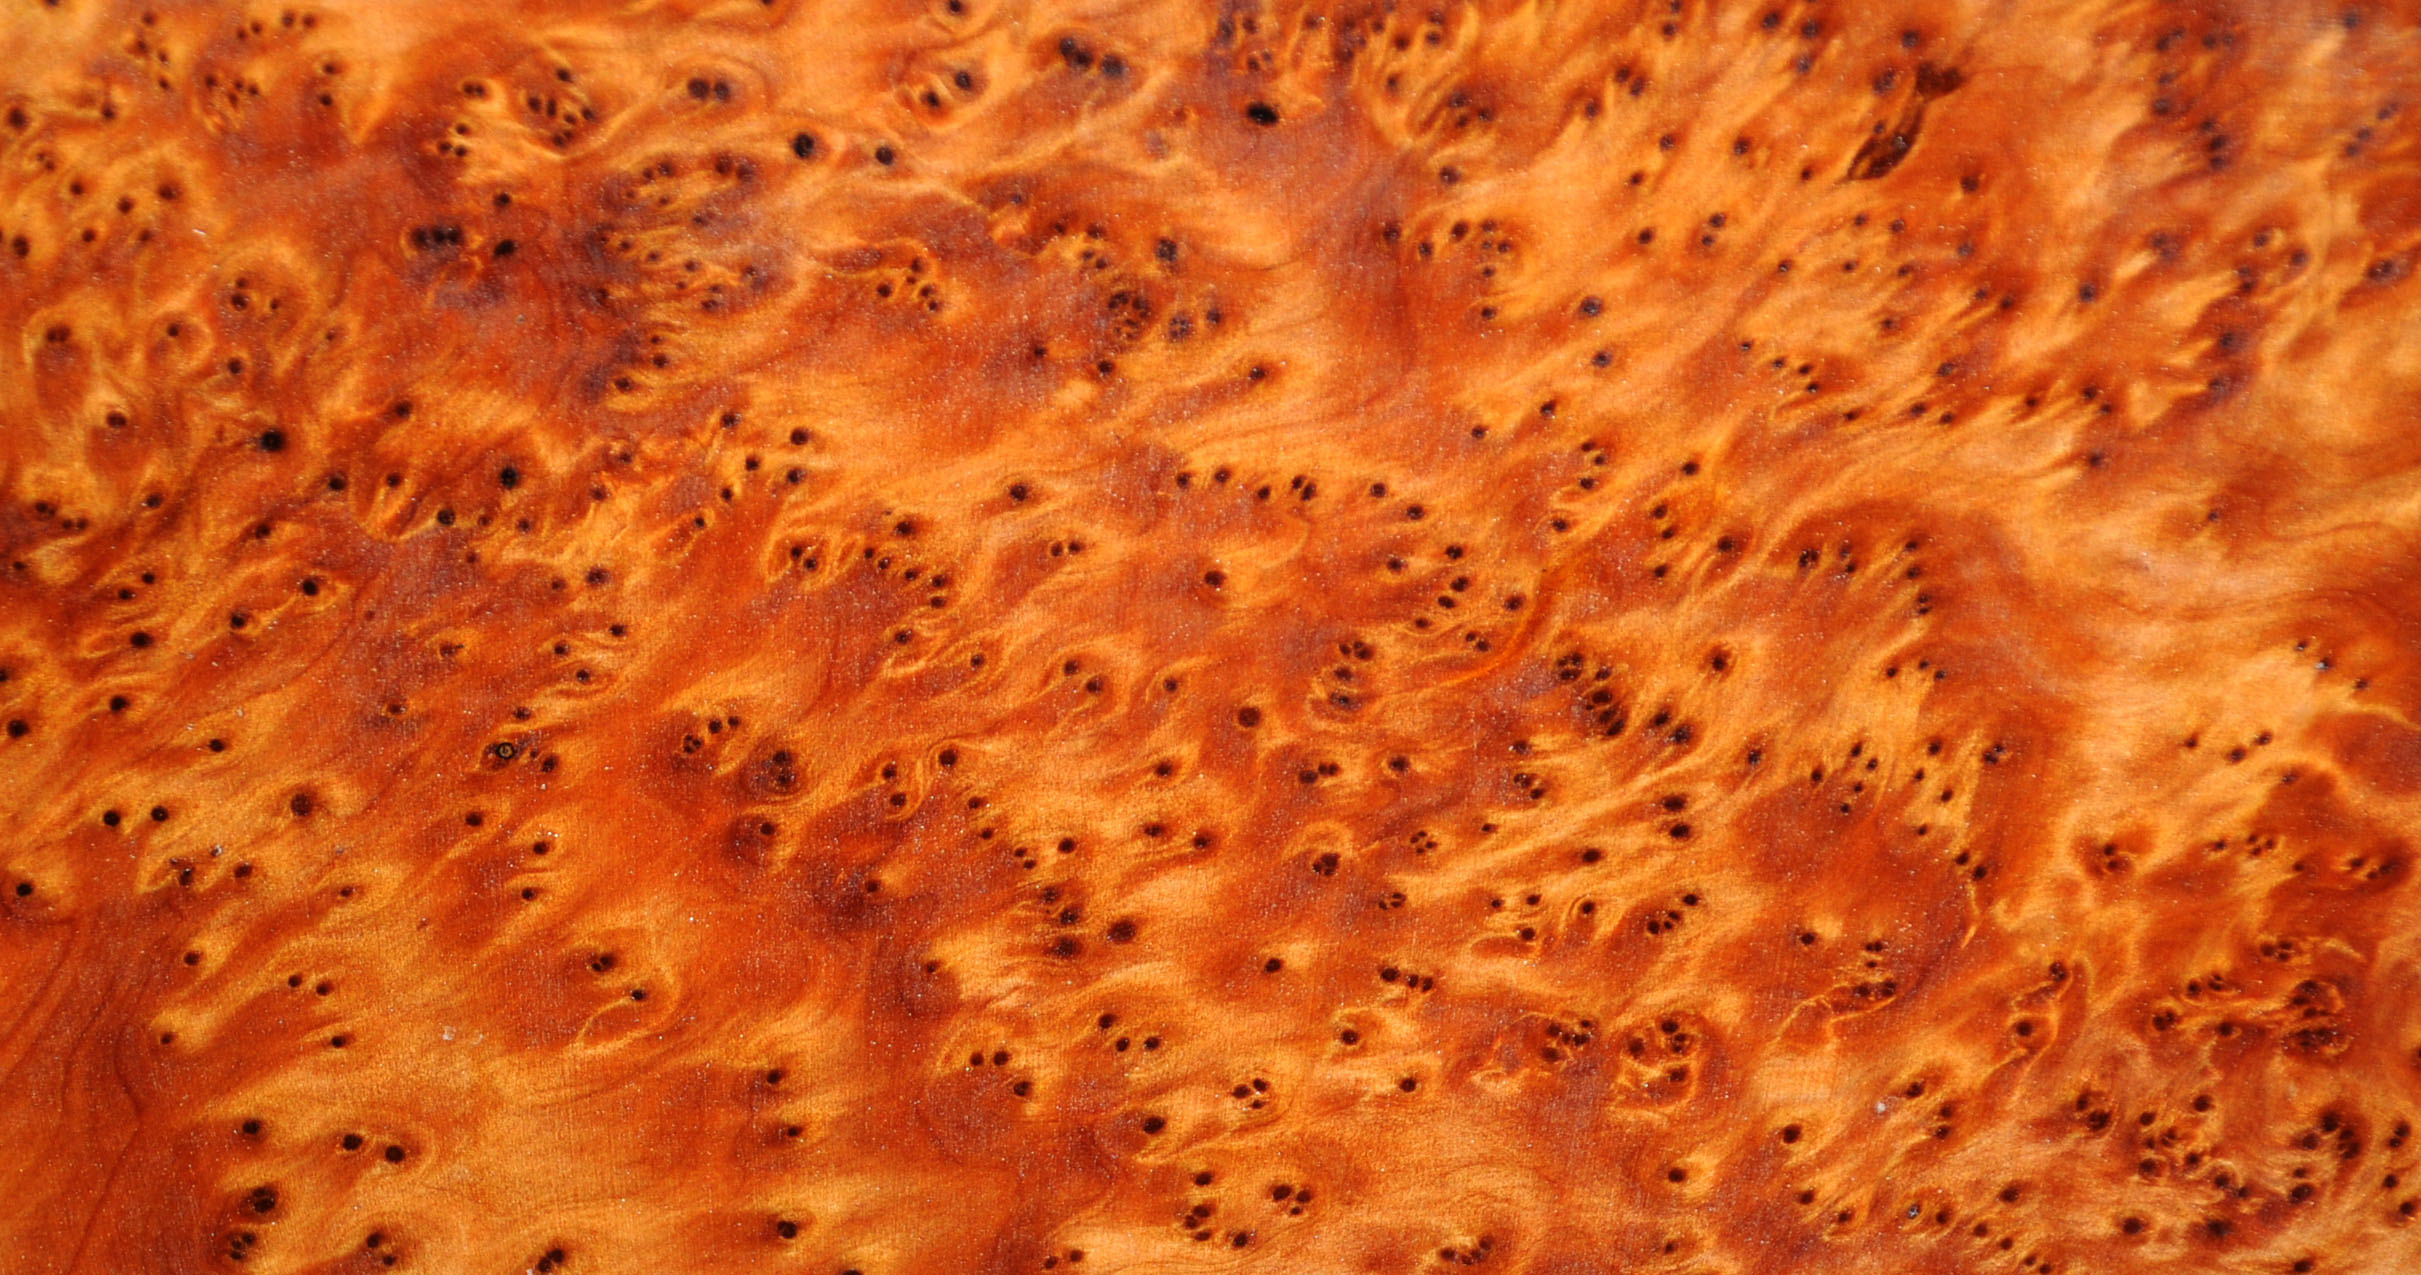 A close up of the many eyes of a Thuya Burl.